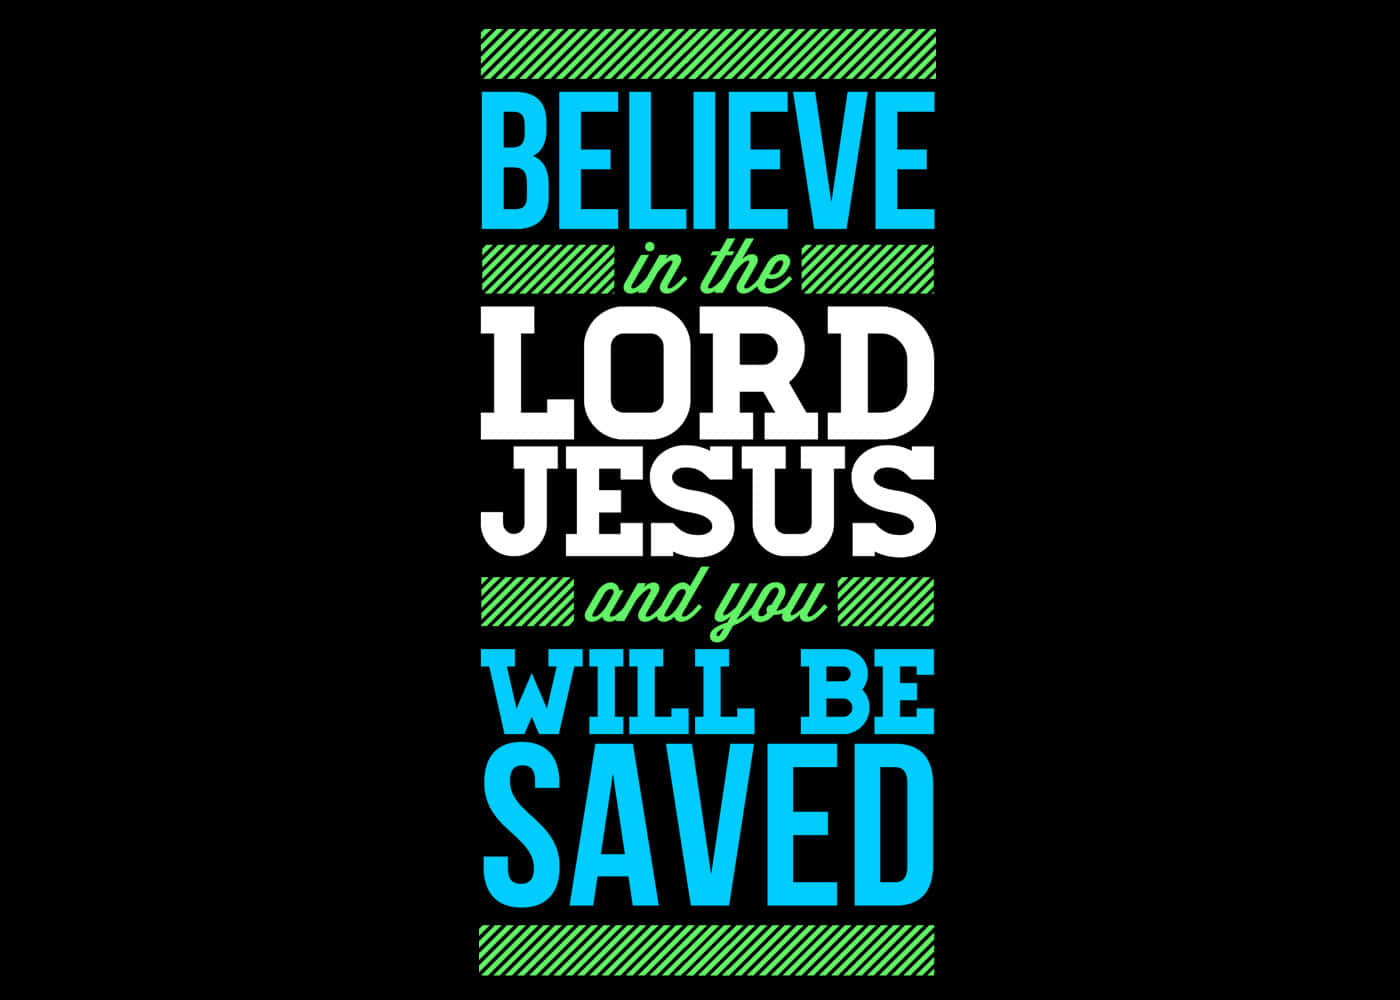 Have Faith in Jesus and He Will Save You. Wallpaper